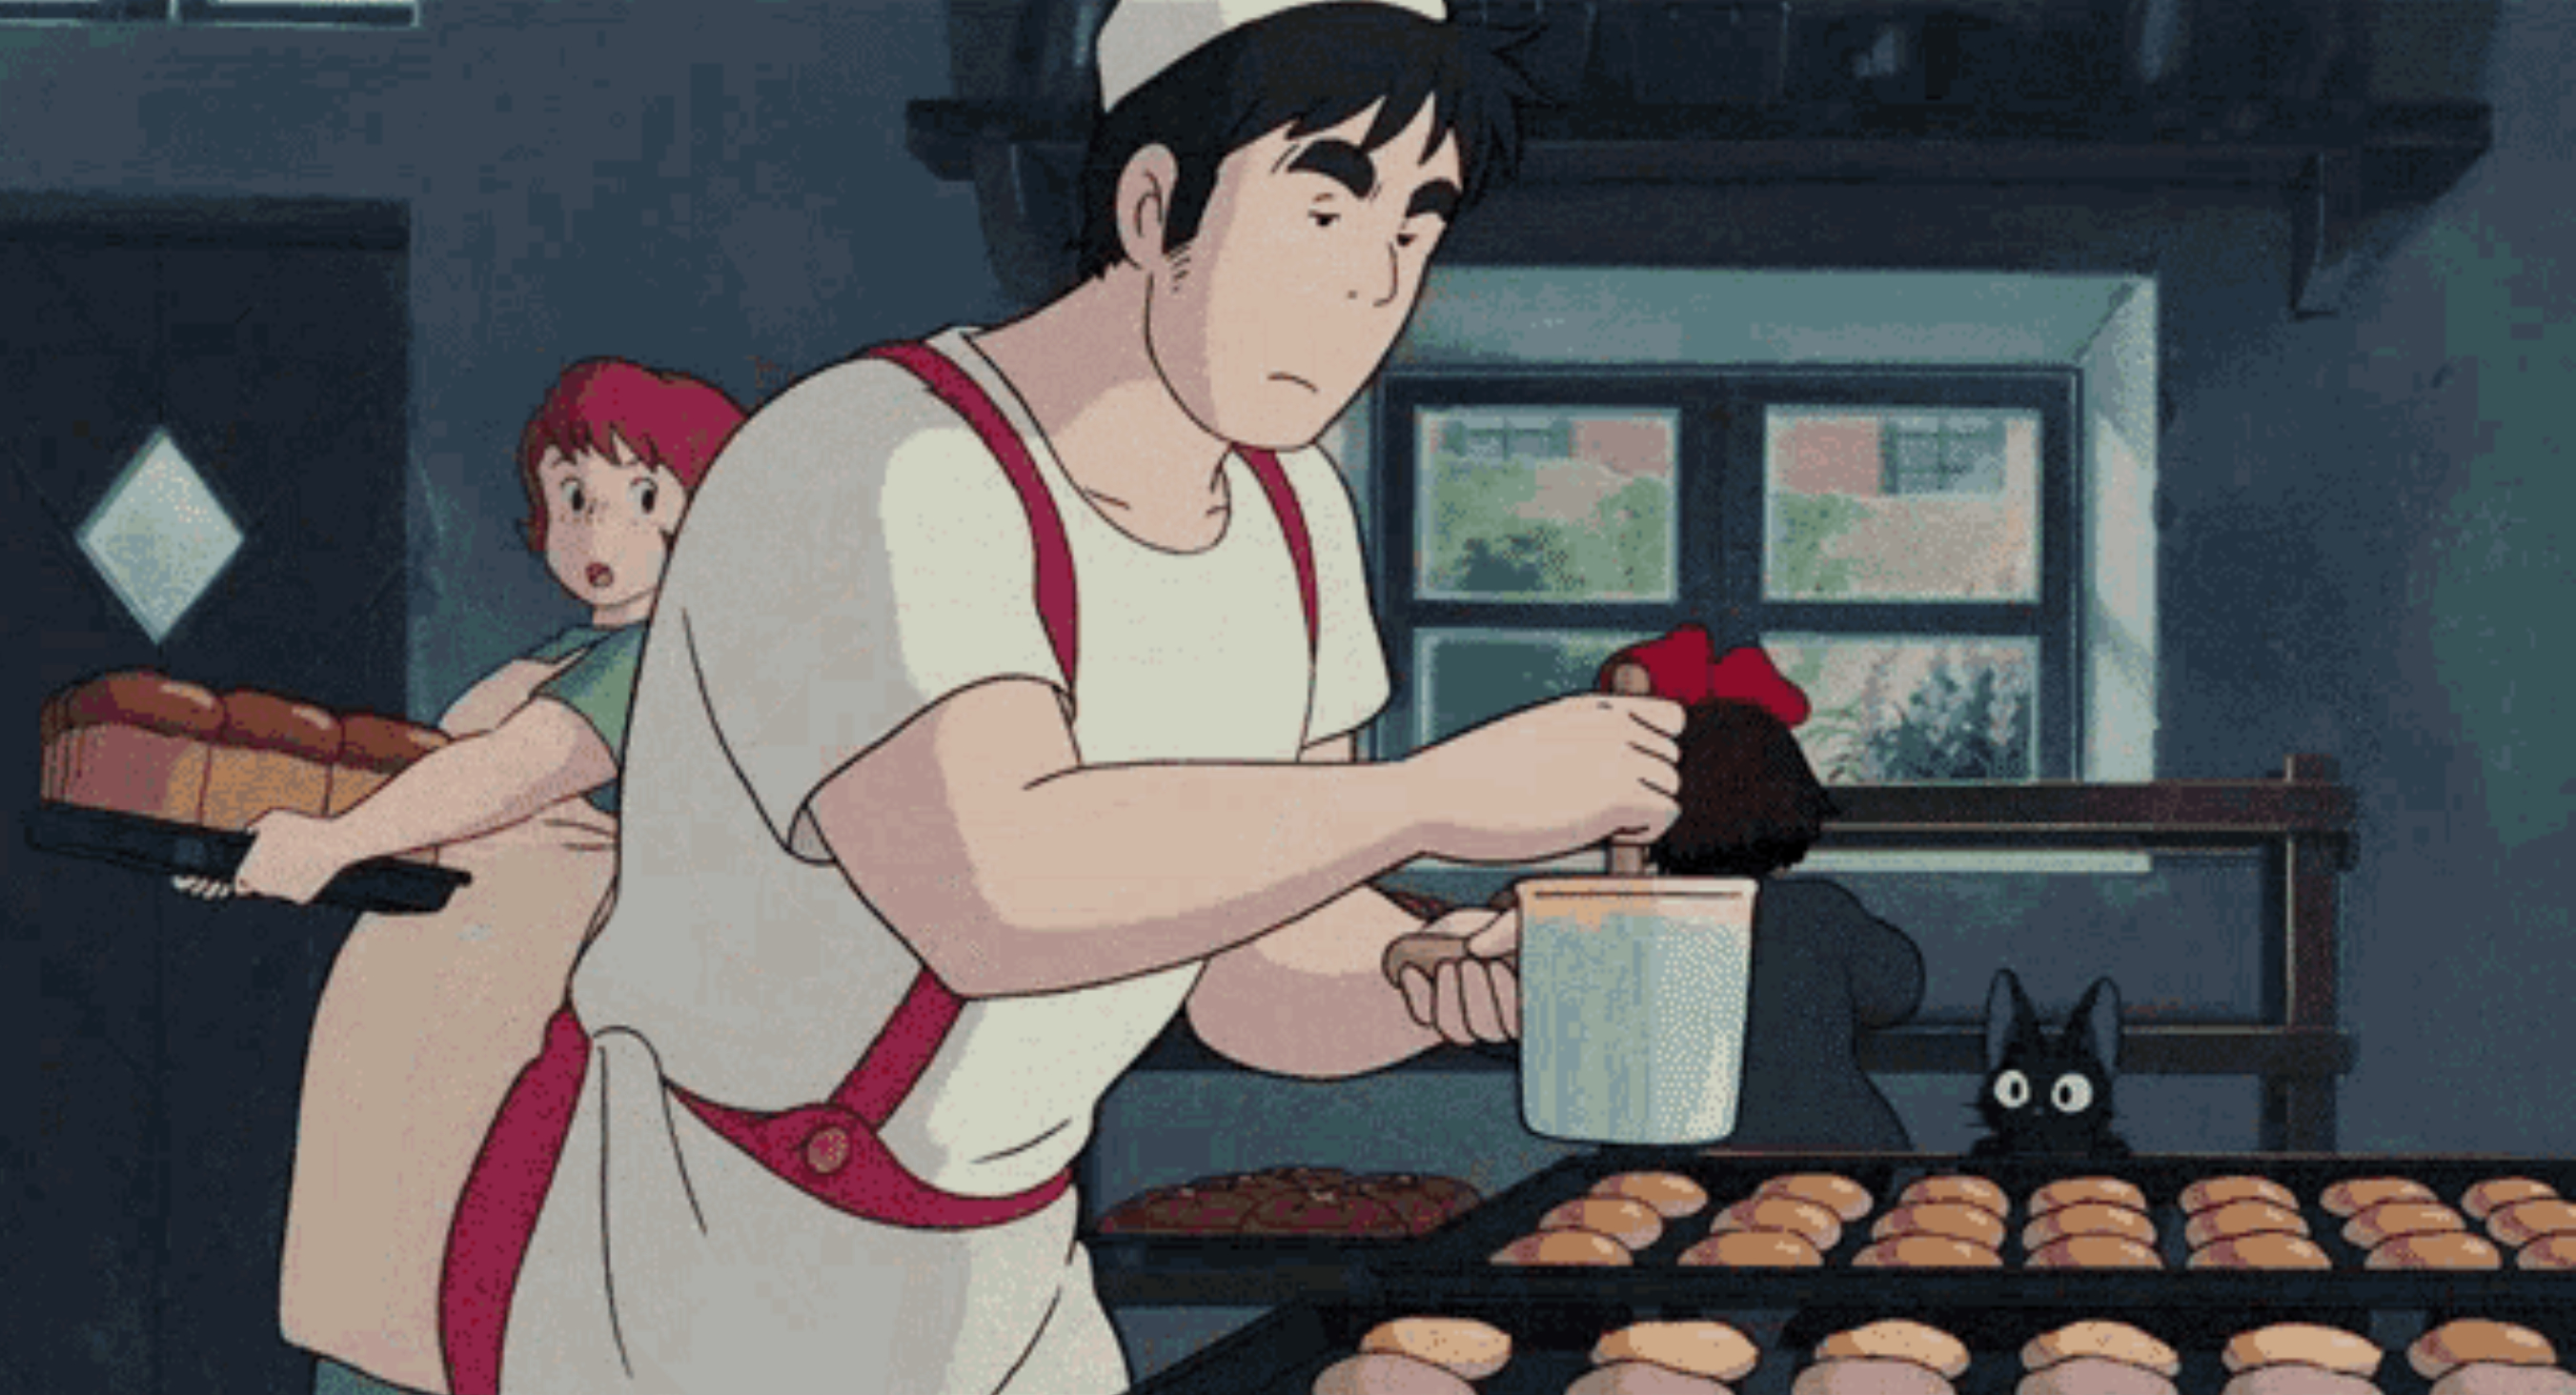 A man in an apron cooking.